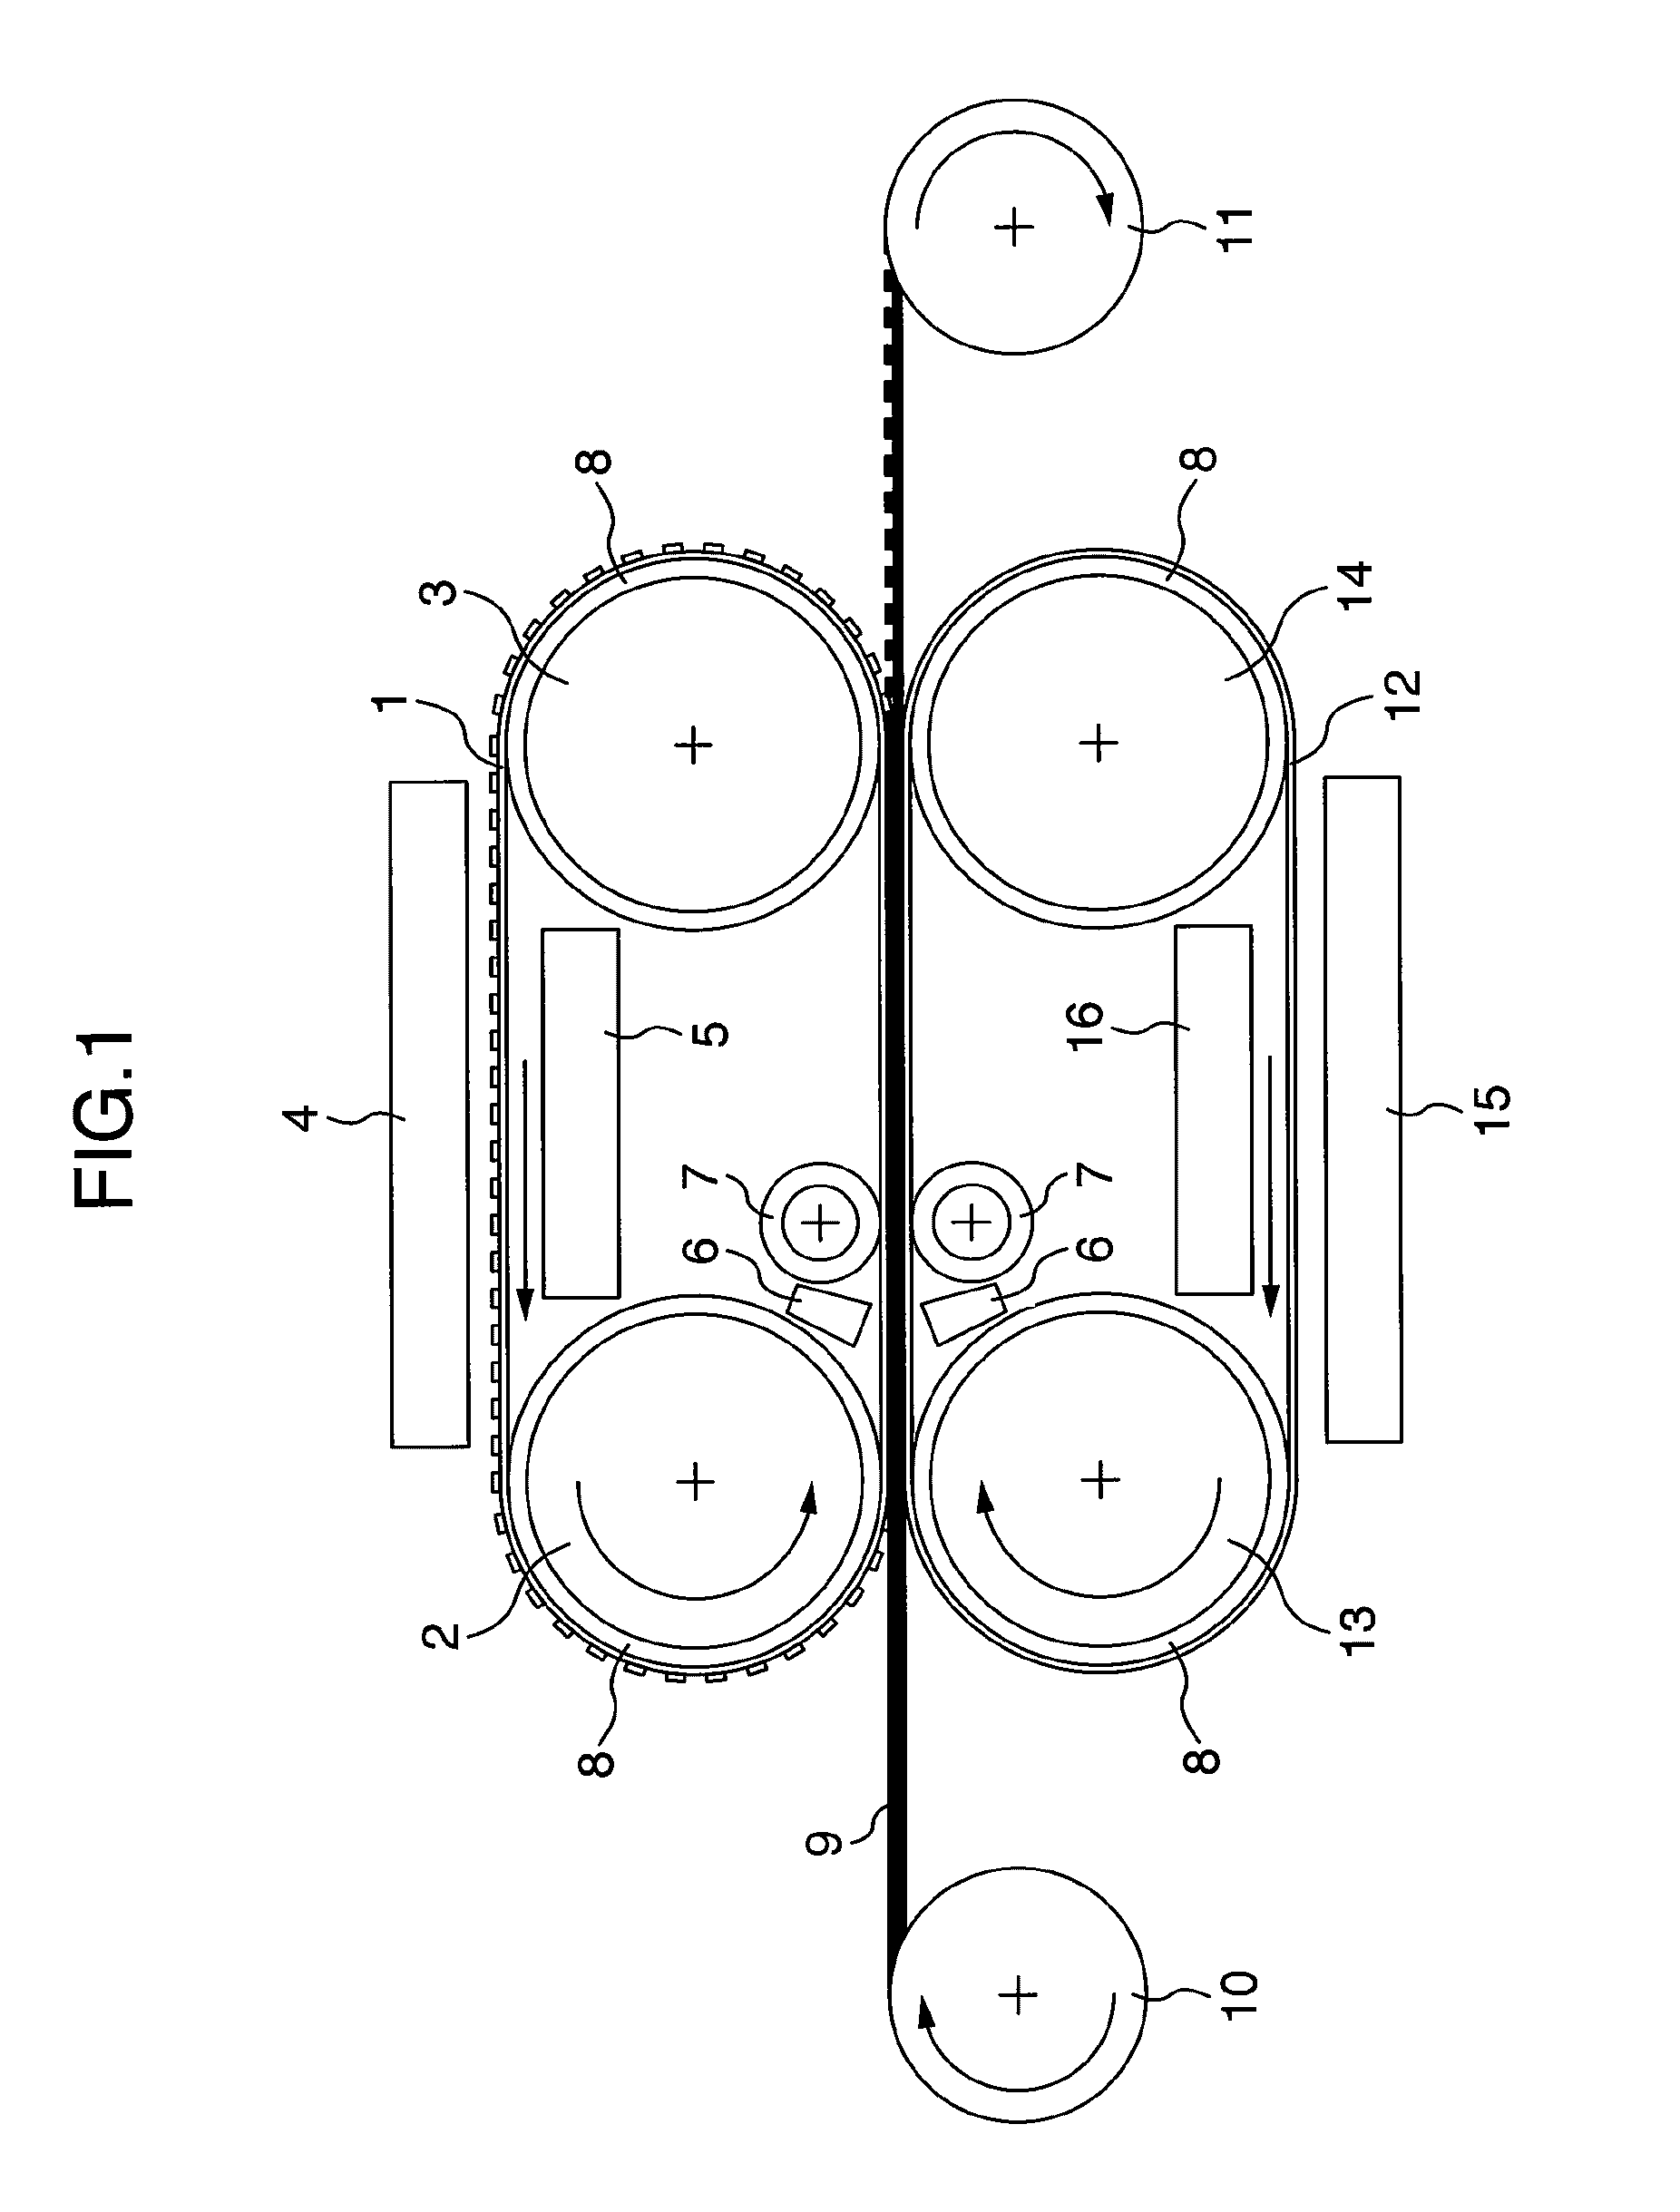 Fine structure formation apparatus